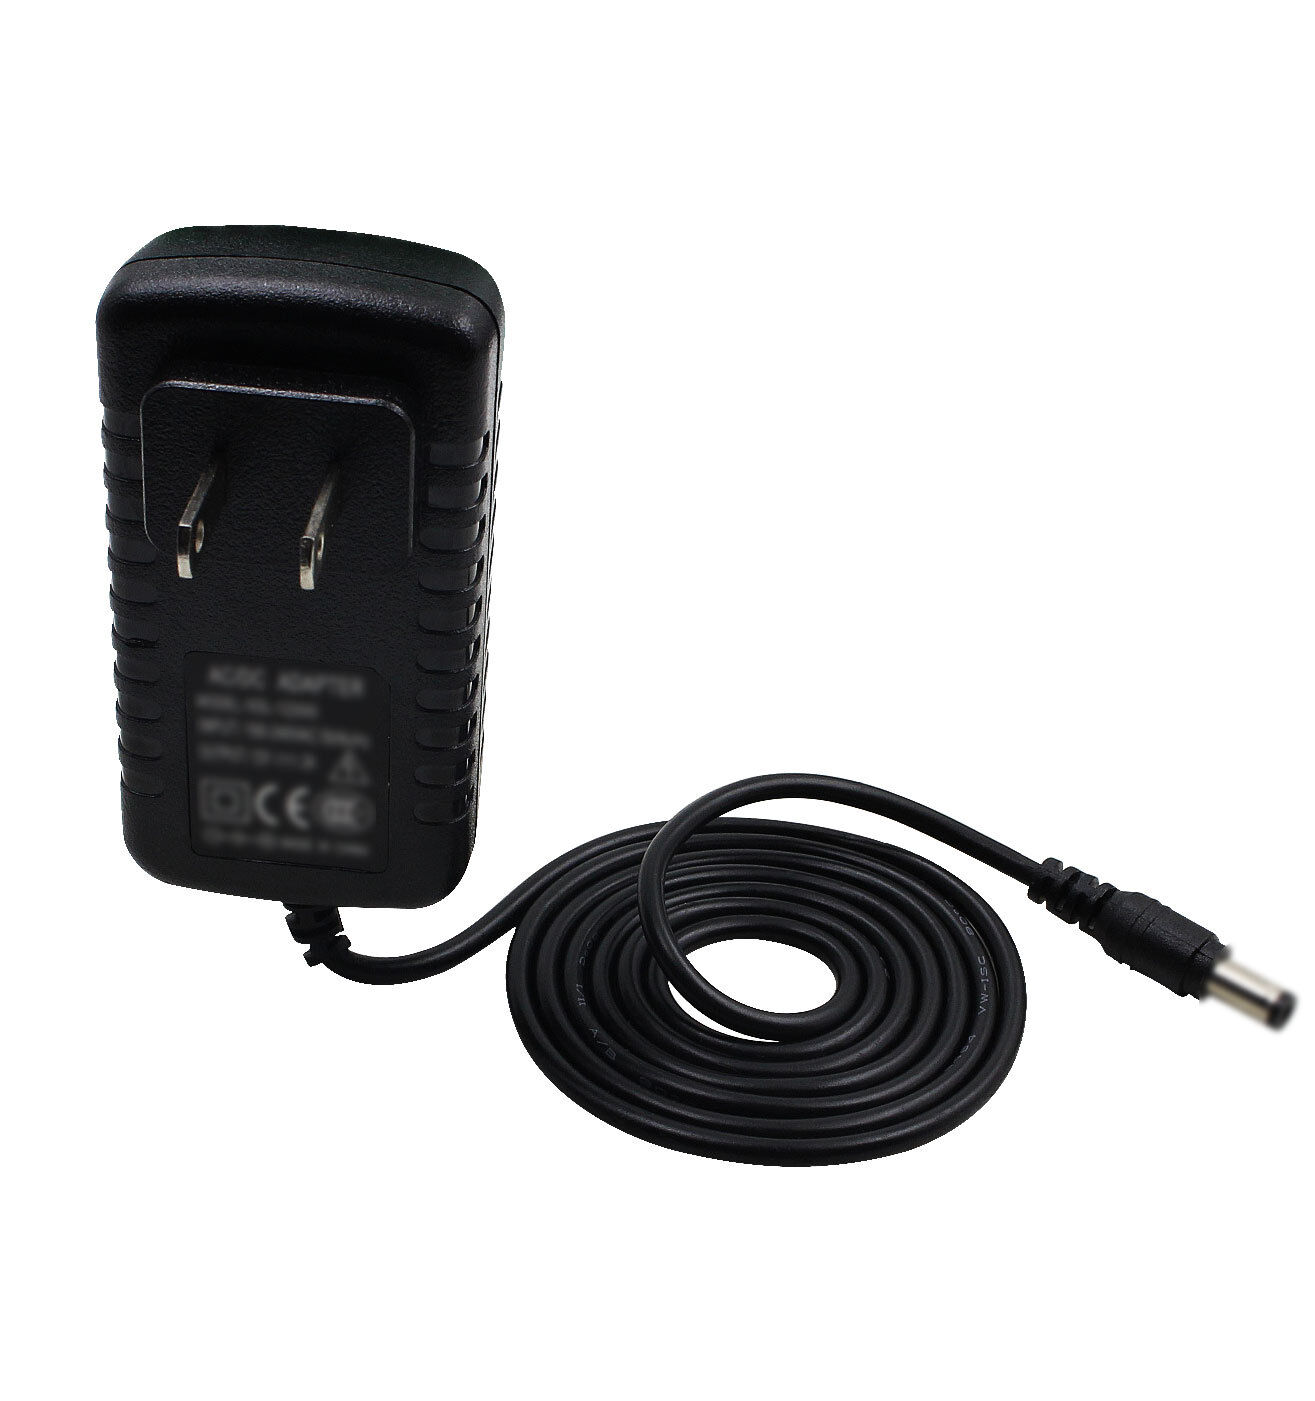 Amcrest HKC0115020-2B 5 Volt / 2 Amp Switching Power Adapter & Cable (Black) Brand Amcrest Type AC Adapter Color Black